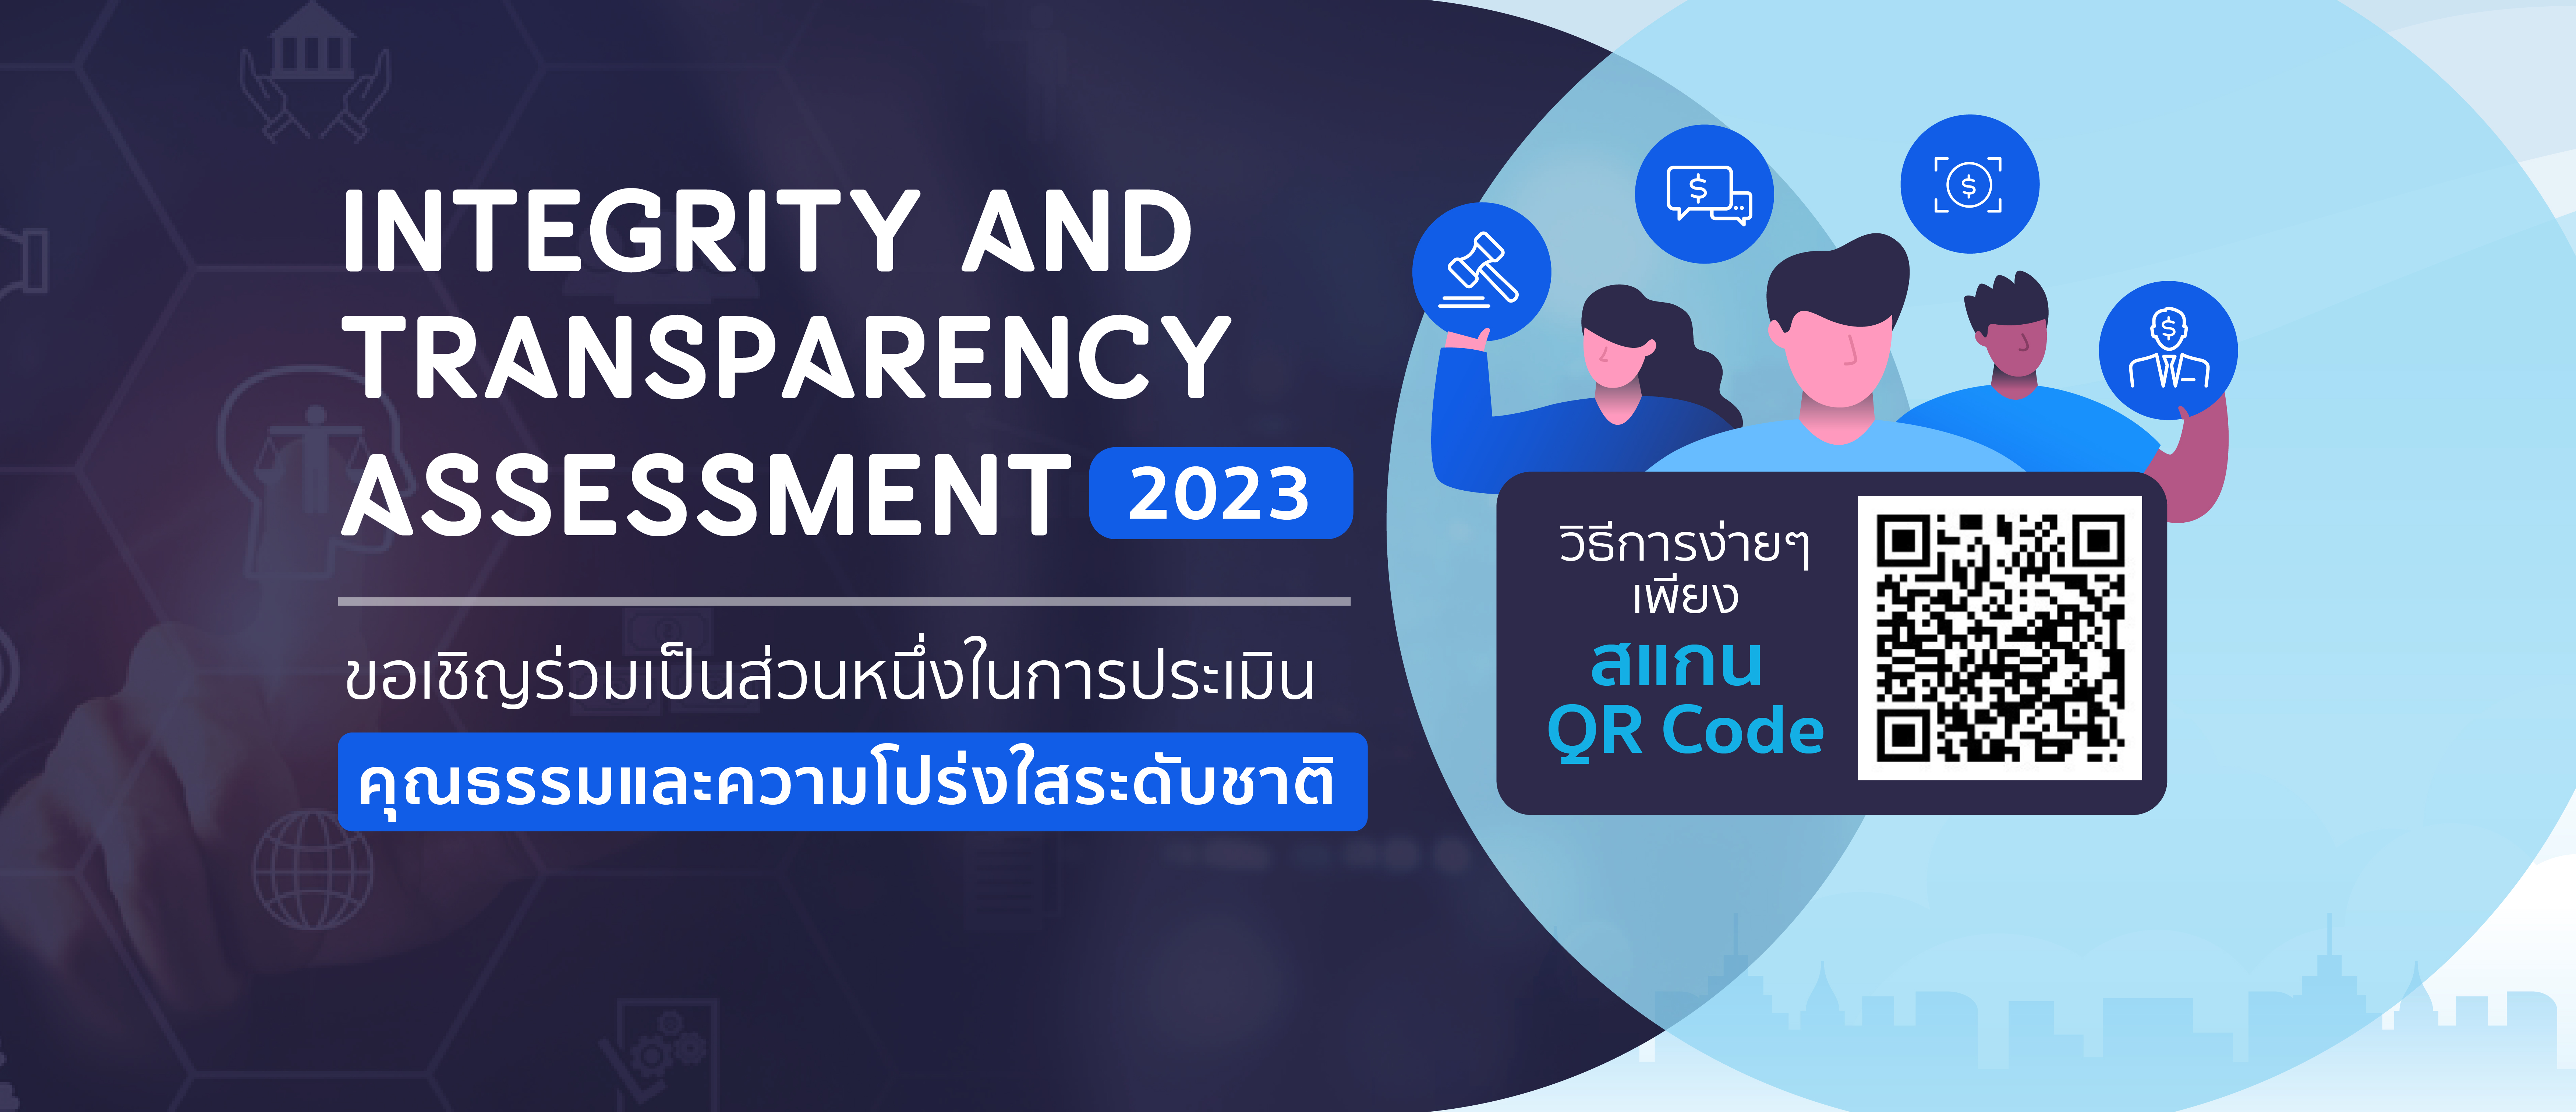 cover_web_Integrity and transparency assessment 2023.jpg